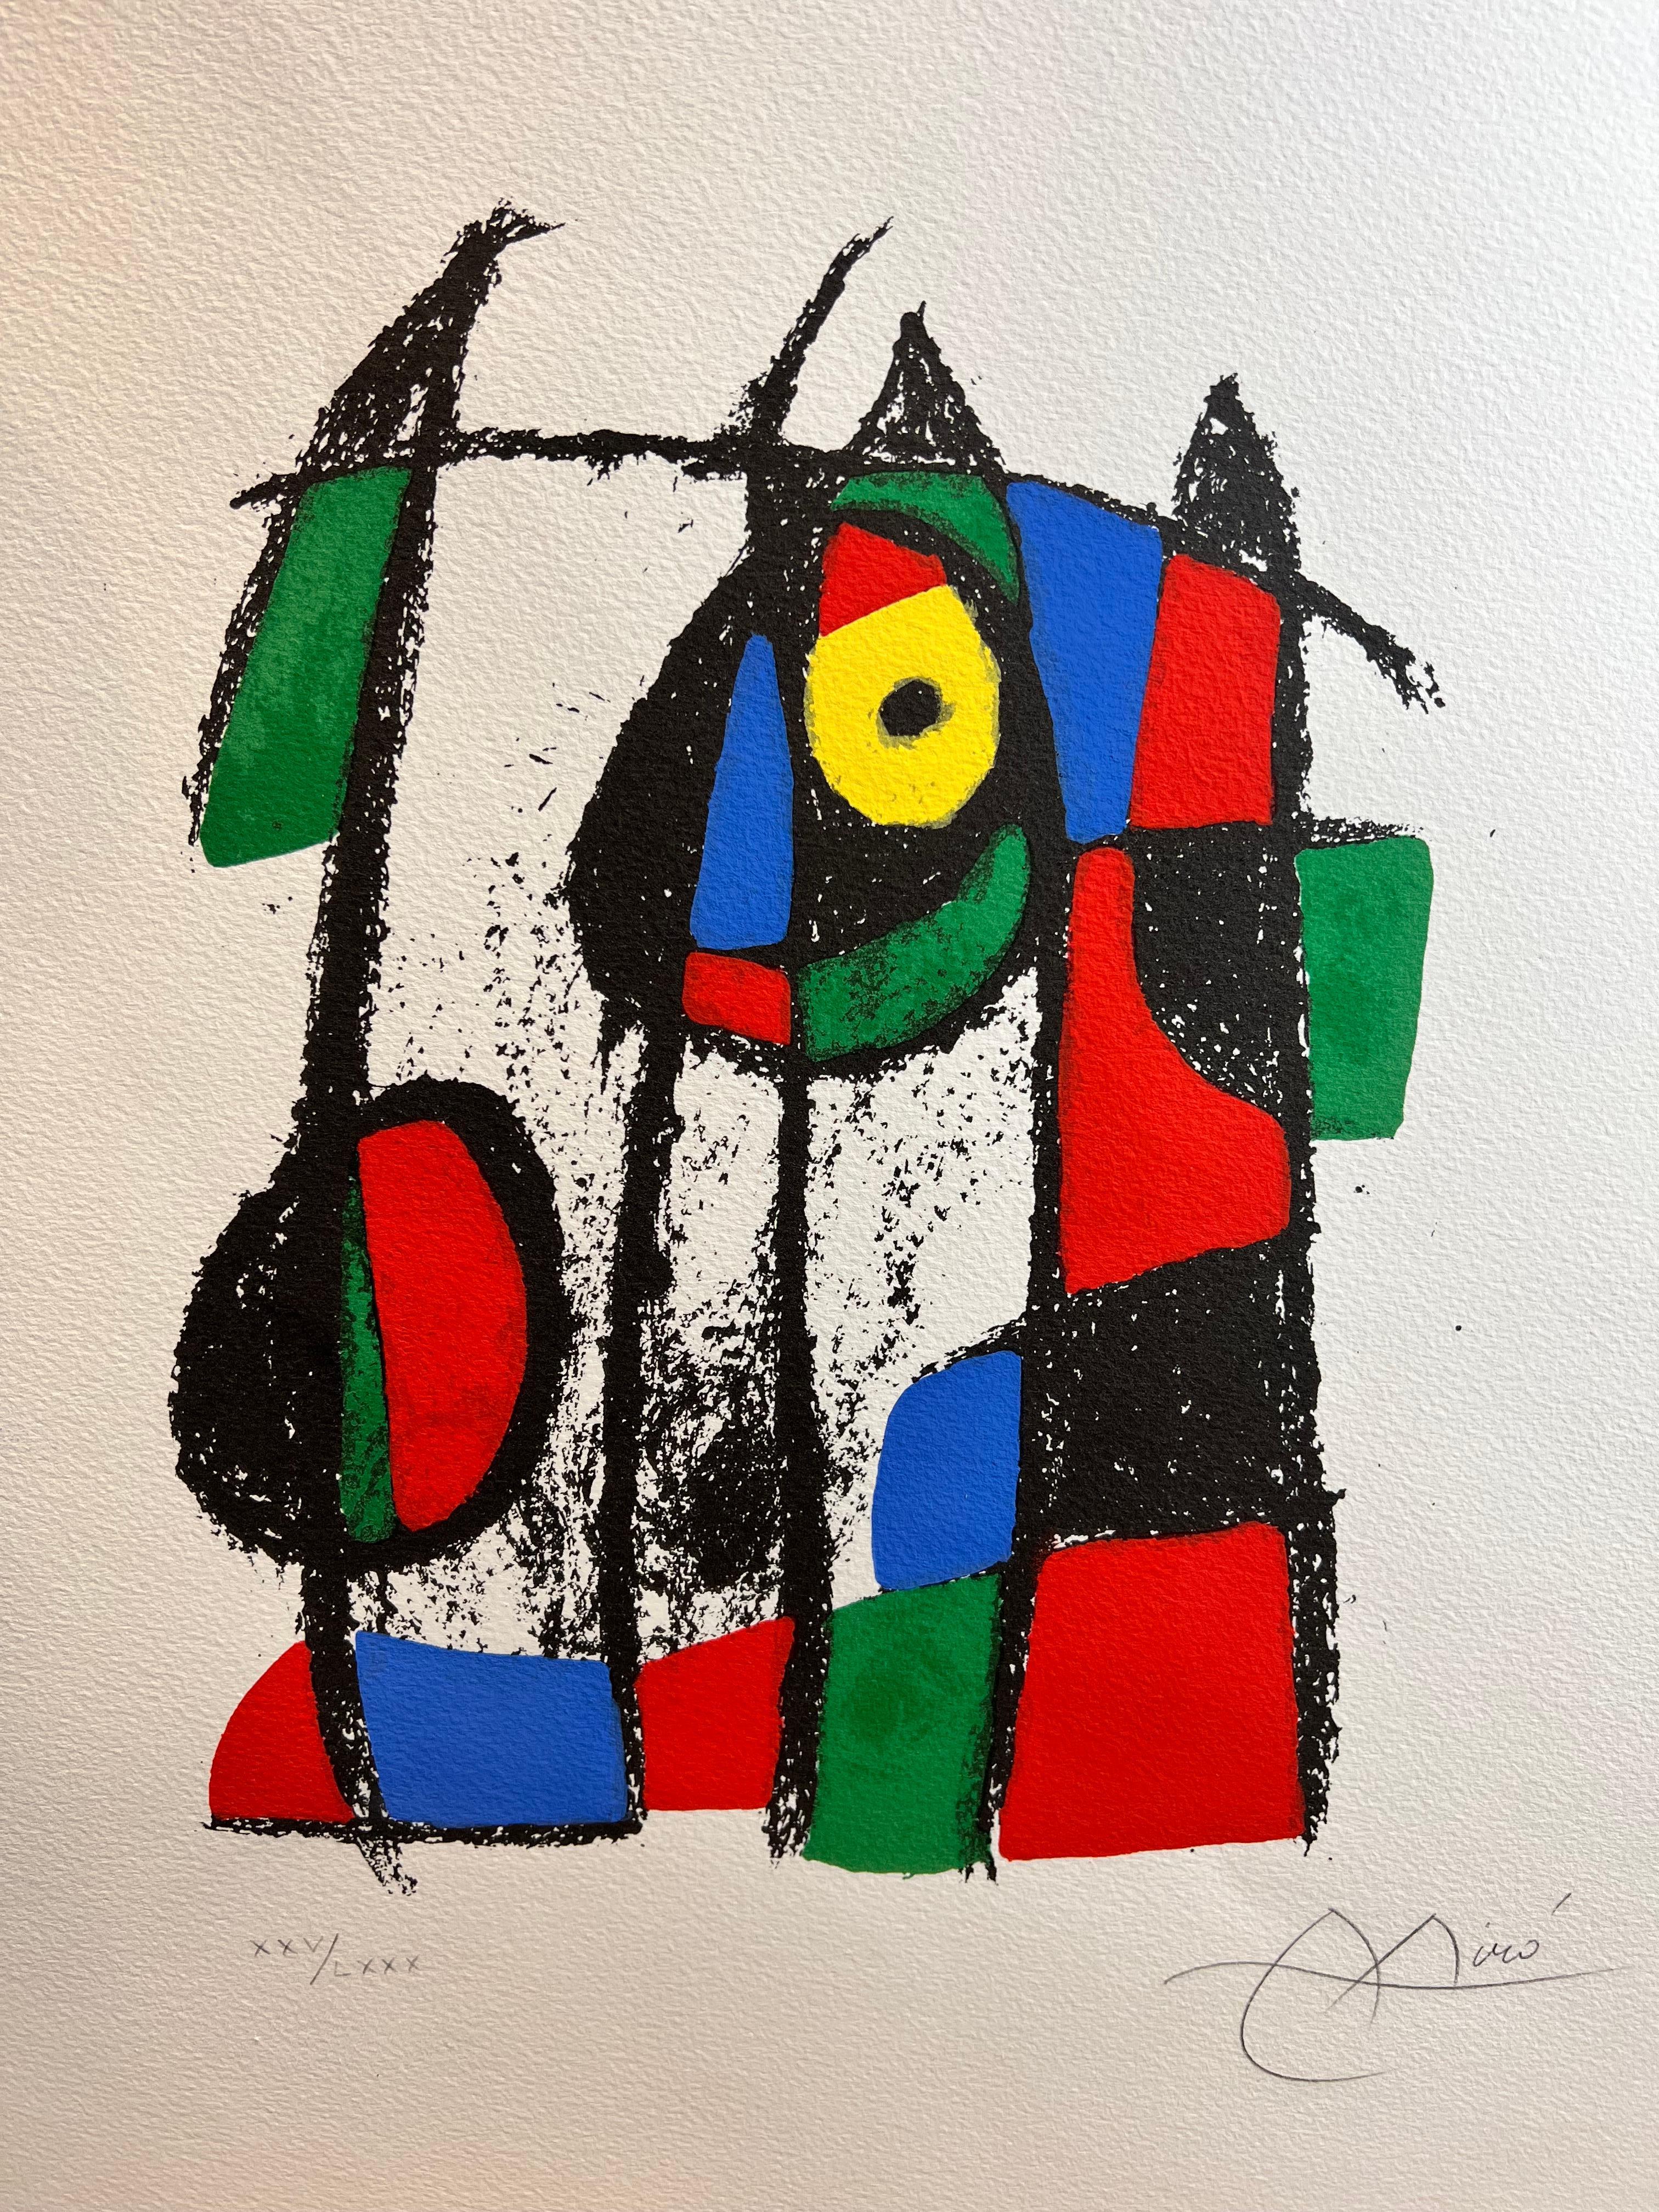 Joan Miró ( 1893 – 1983 ) – hand-signed Lithograph on Arches paper – 1975 4